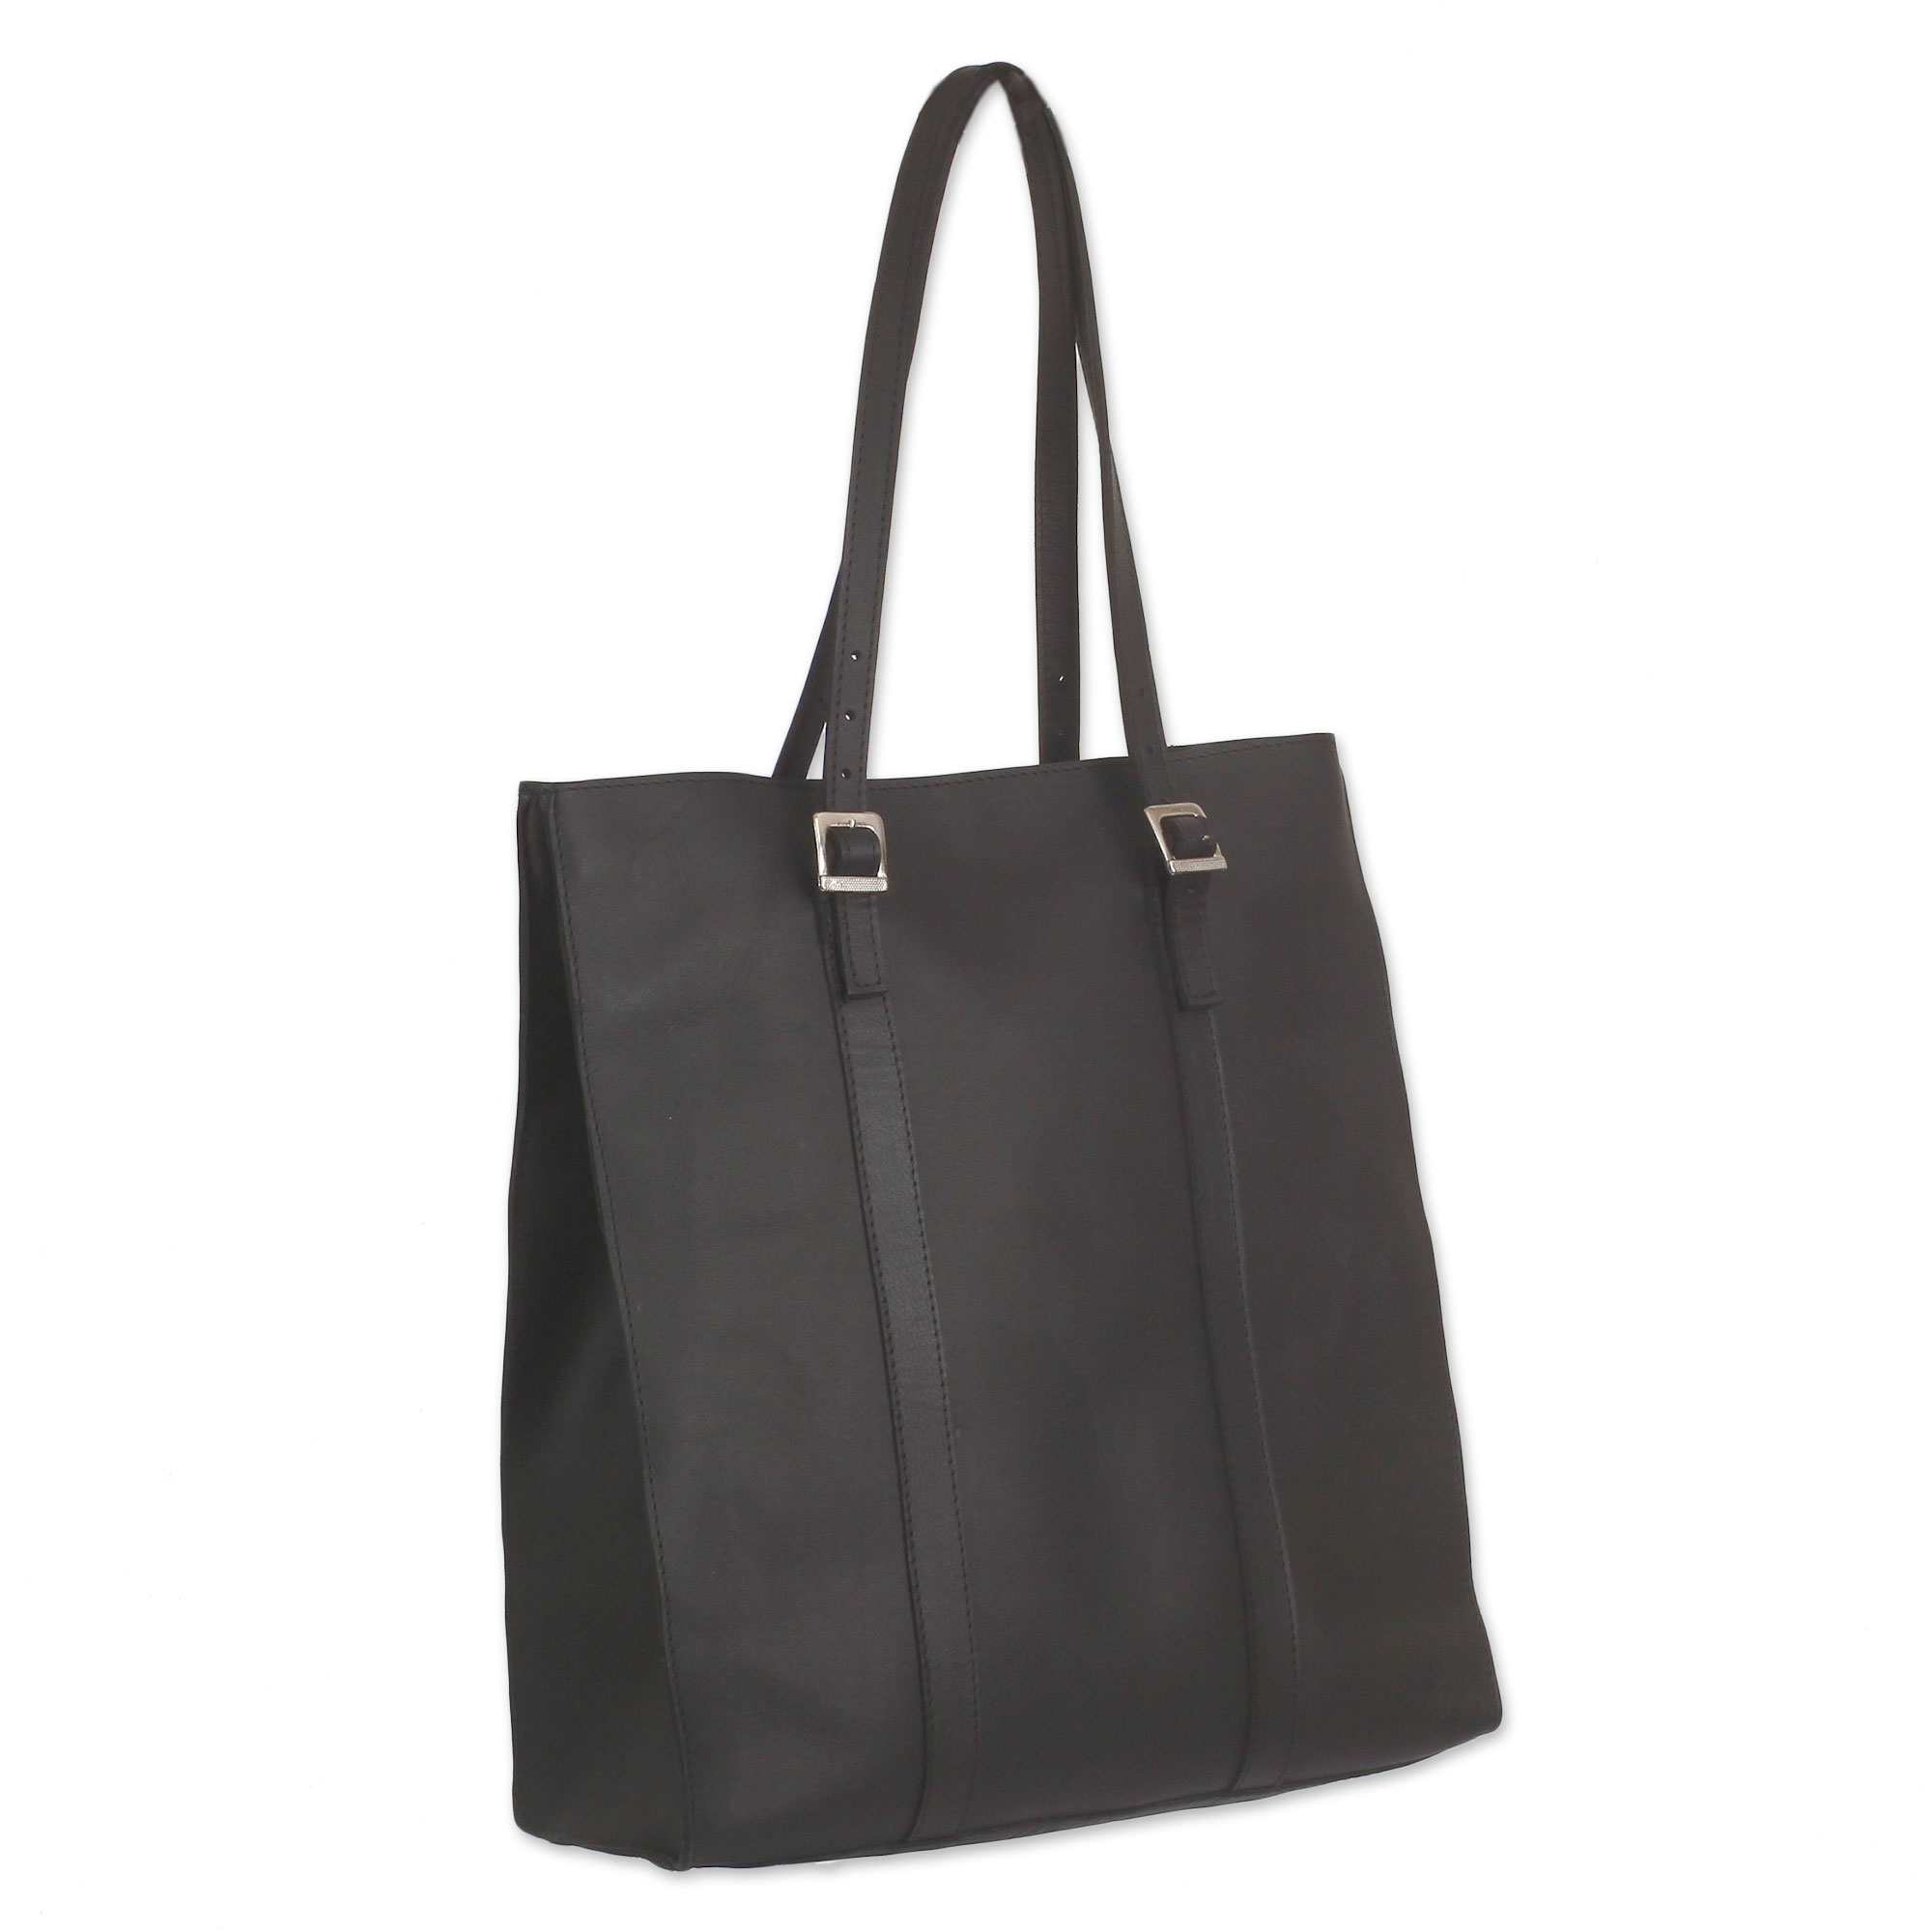 Handcrafted Black Leather Tote Bag with Adjustable Straps - Market Chic ...